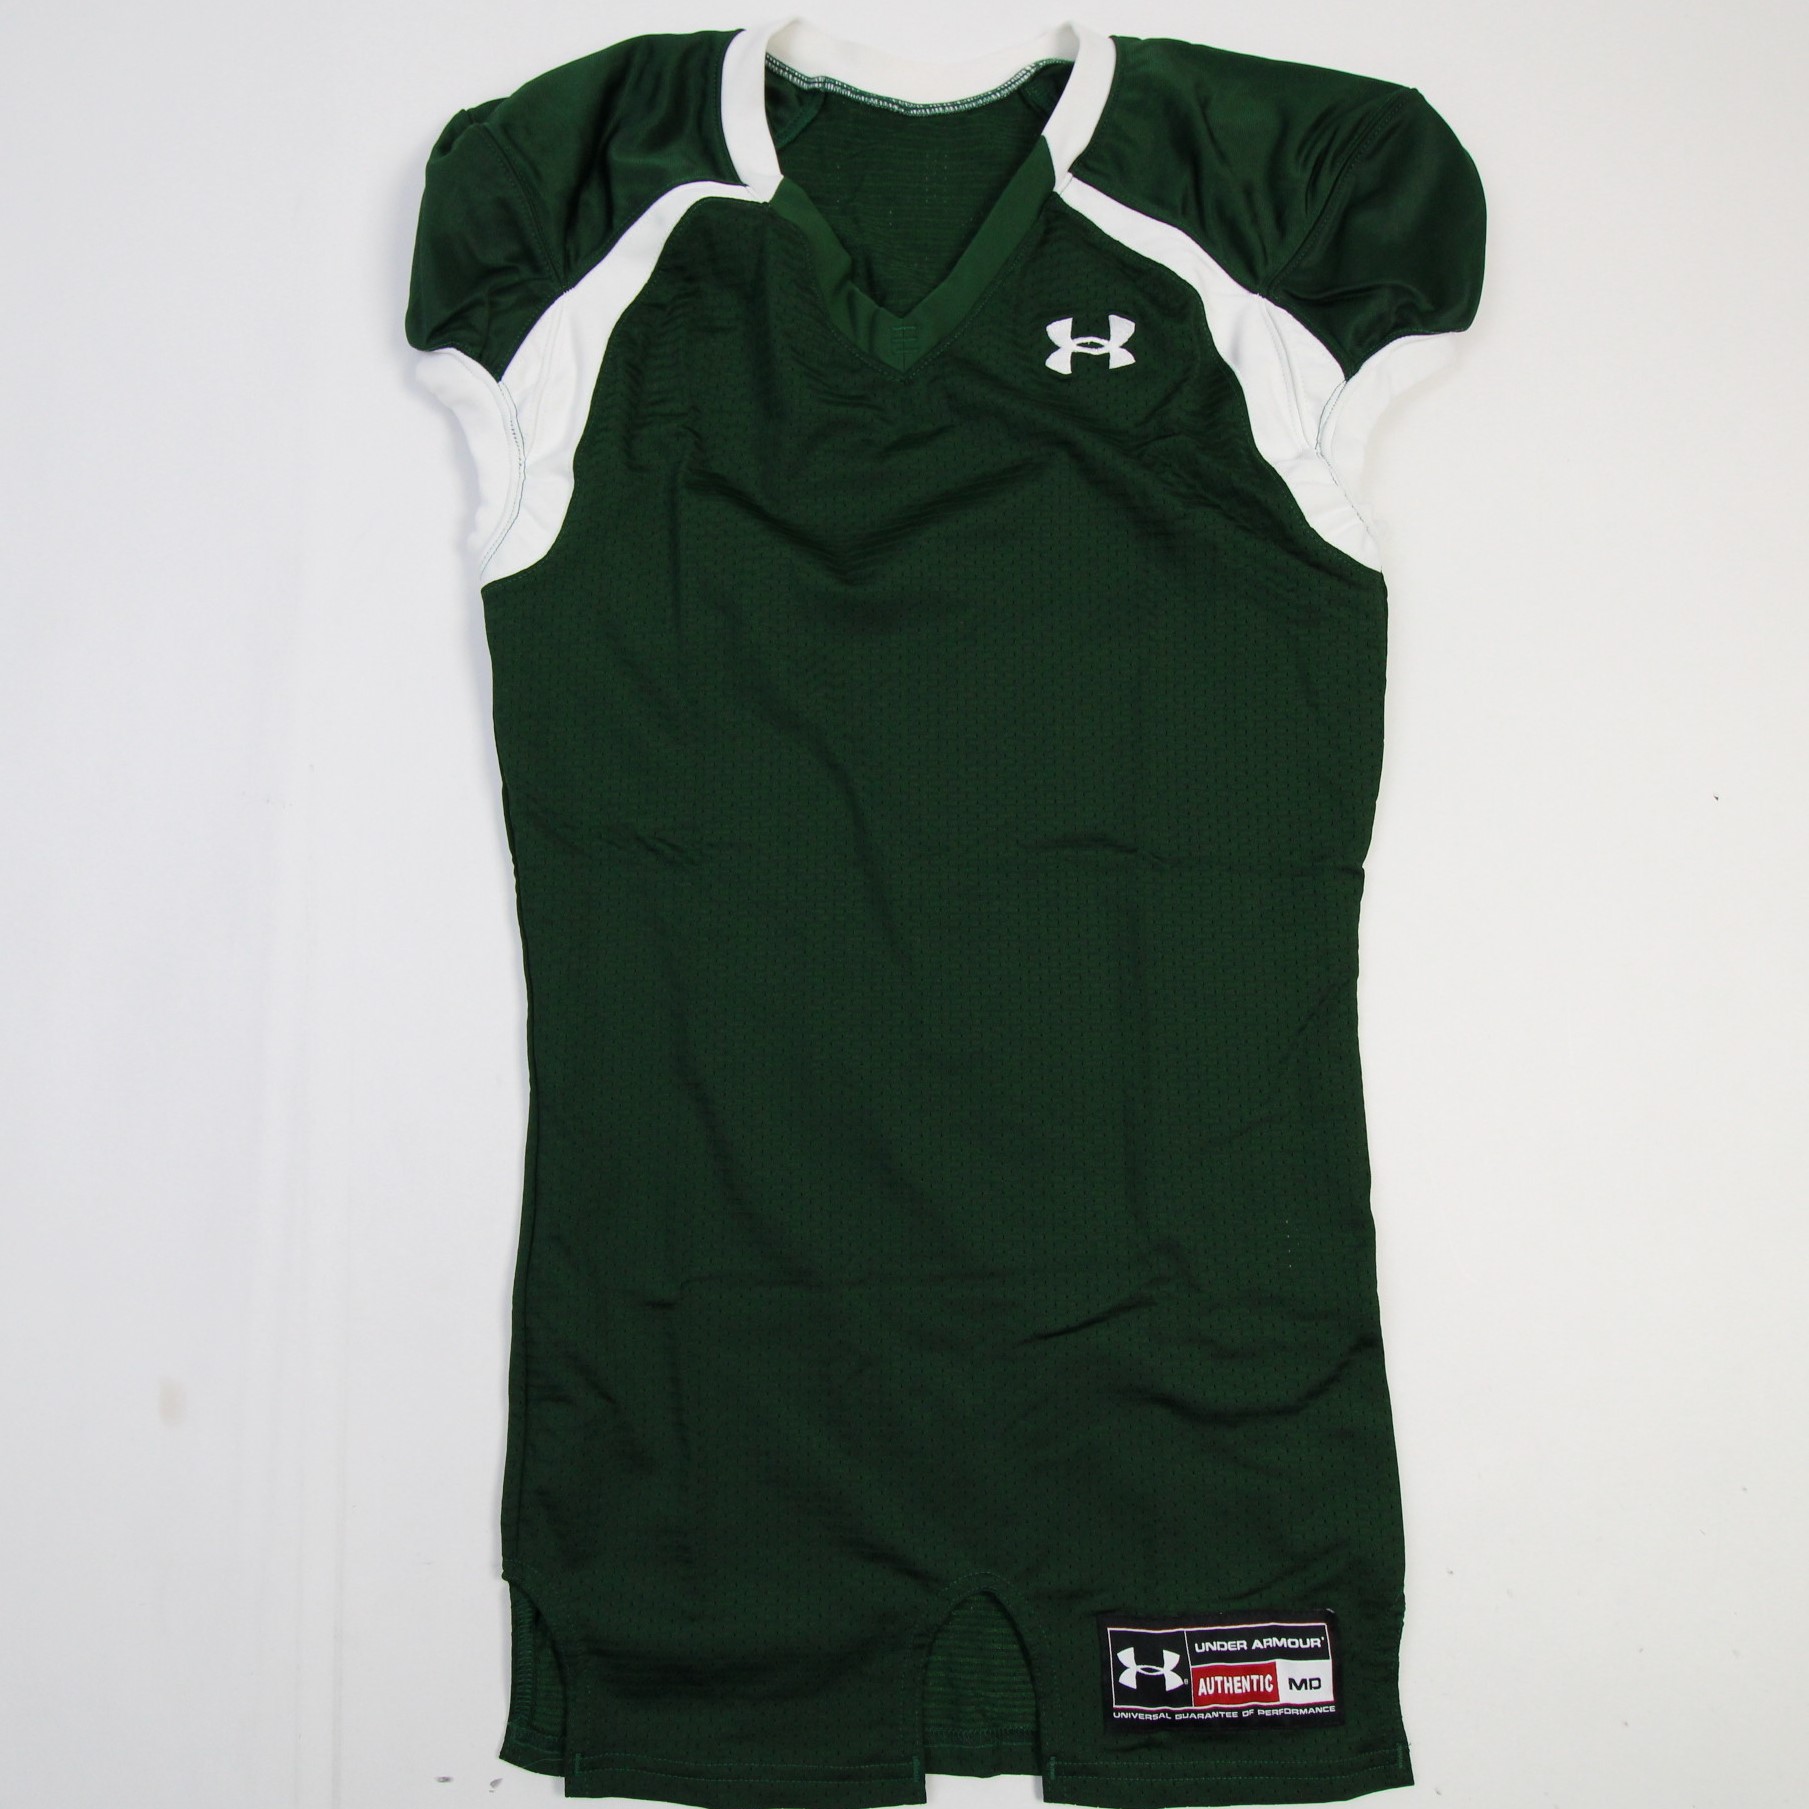 Details about   UNDER ARMOUR Men's Football Practice Jersey Heat Gear Fitted Size 1276840 